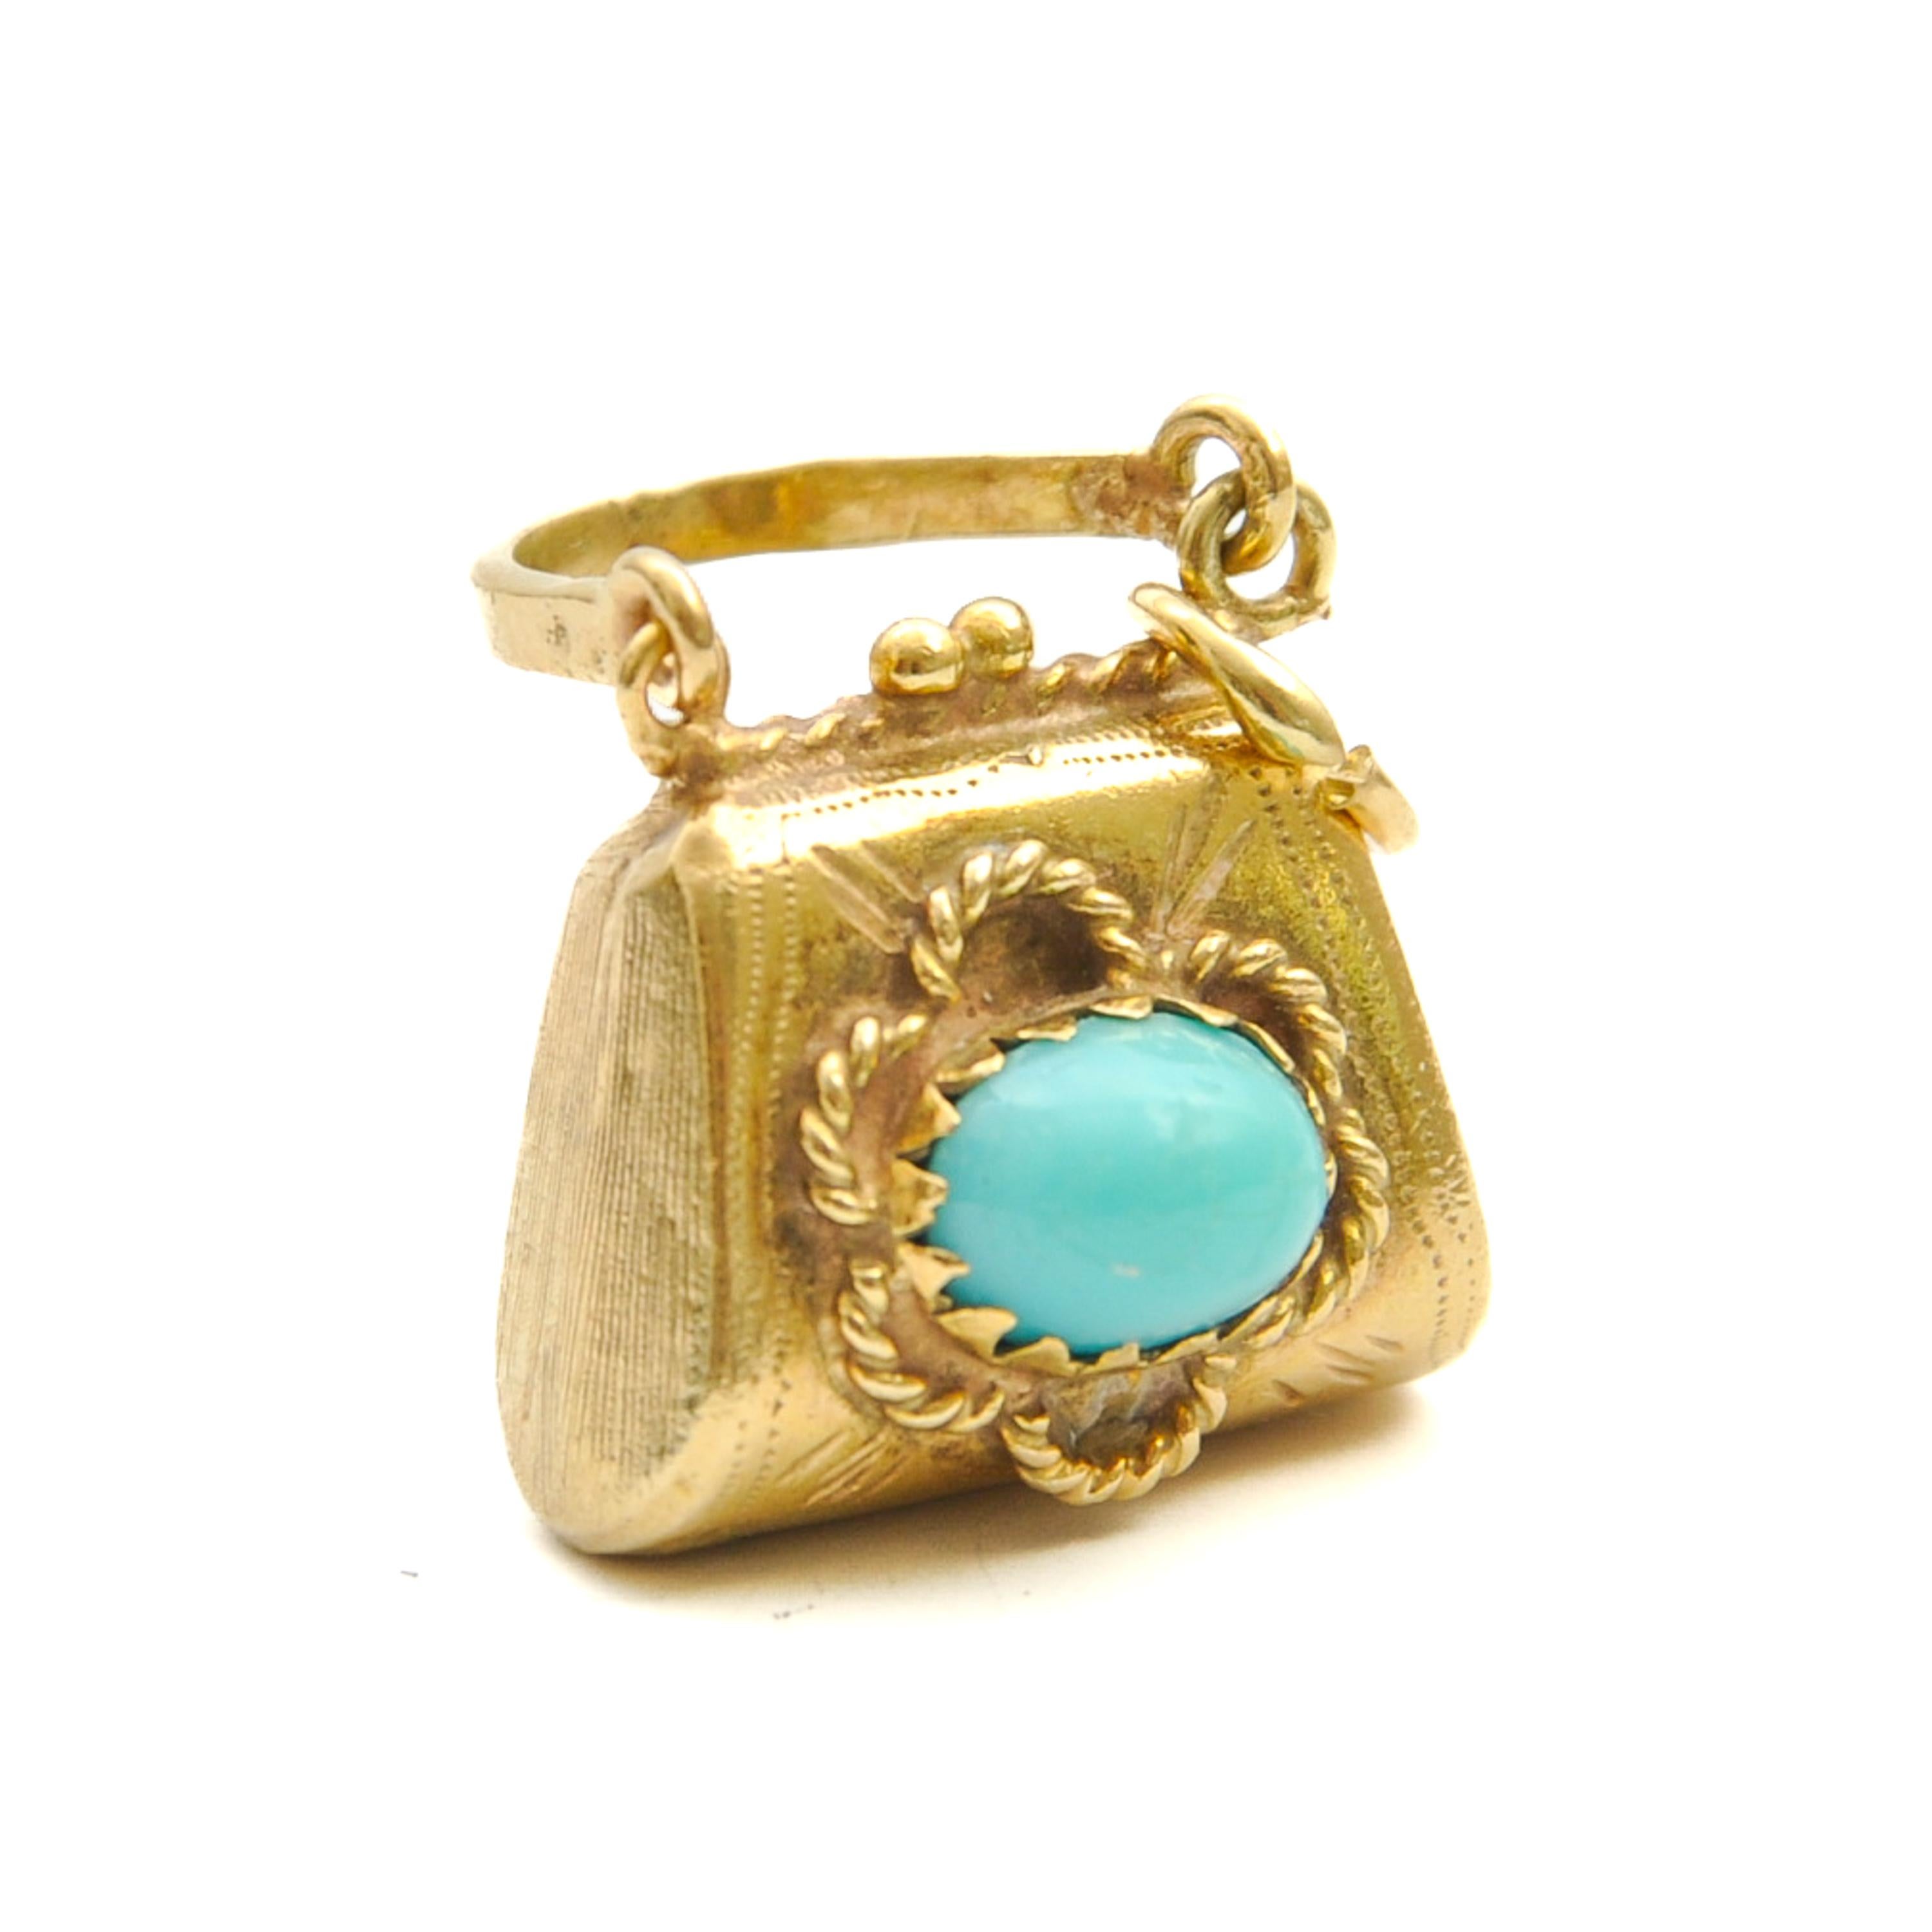 Cabochon Vintage 14K Gold and Turquoise Purse Charm Pendant For Sale